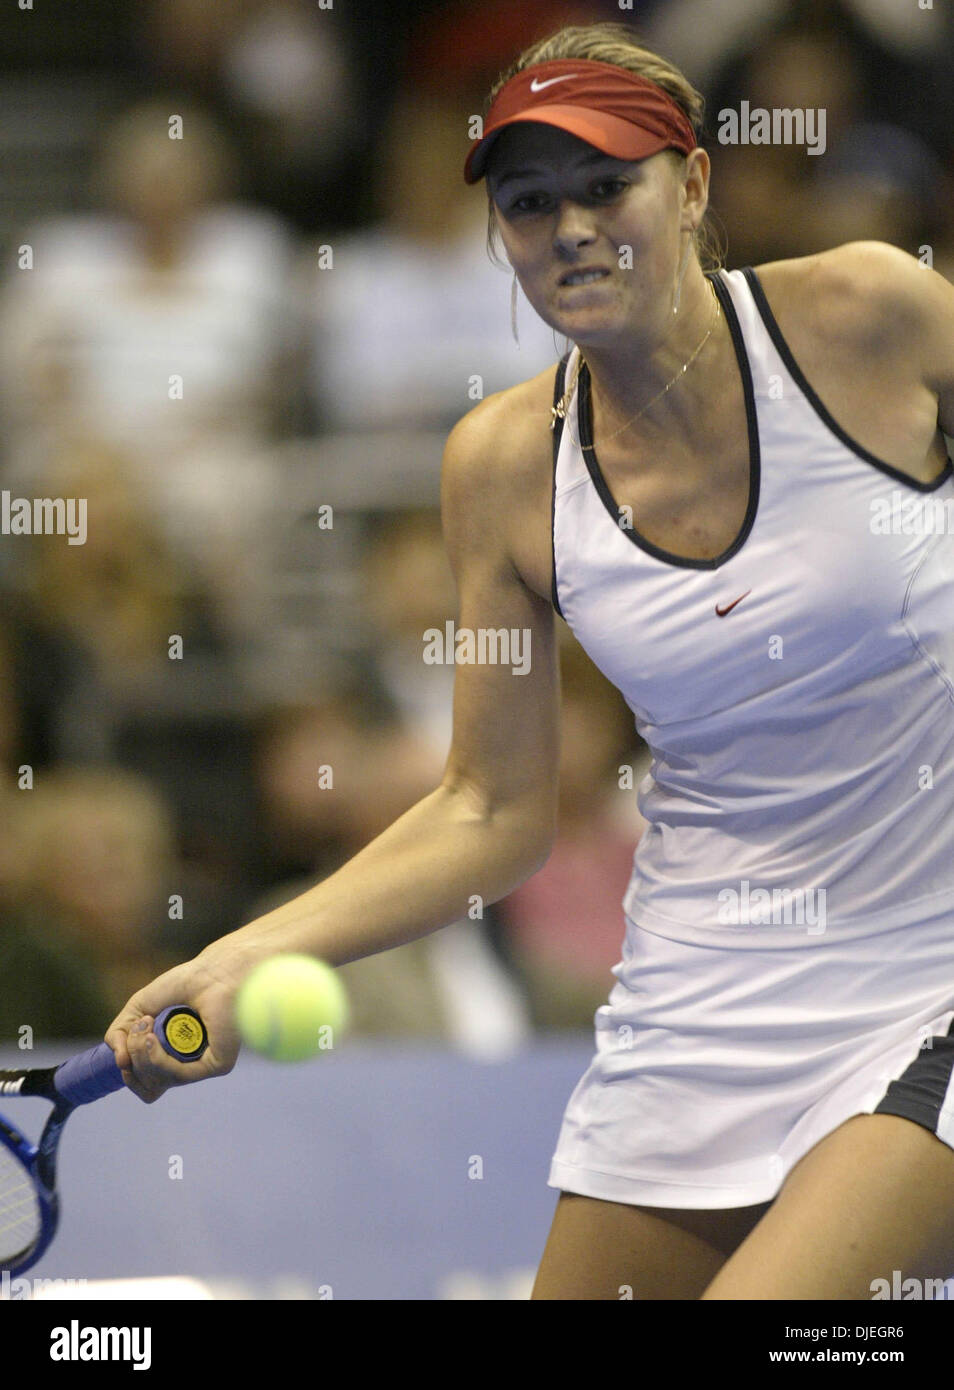 Nov 11, 2004; Los Angeles, CA, USA; MARIA SHARAPOVA of Russia playing against Vera Zvonareva of Rusia during their tennis match at the 2004 WTA Tour Championships Friday 11 November 2004 at the Staples Center in Los Angeles, California. Stock Photo